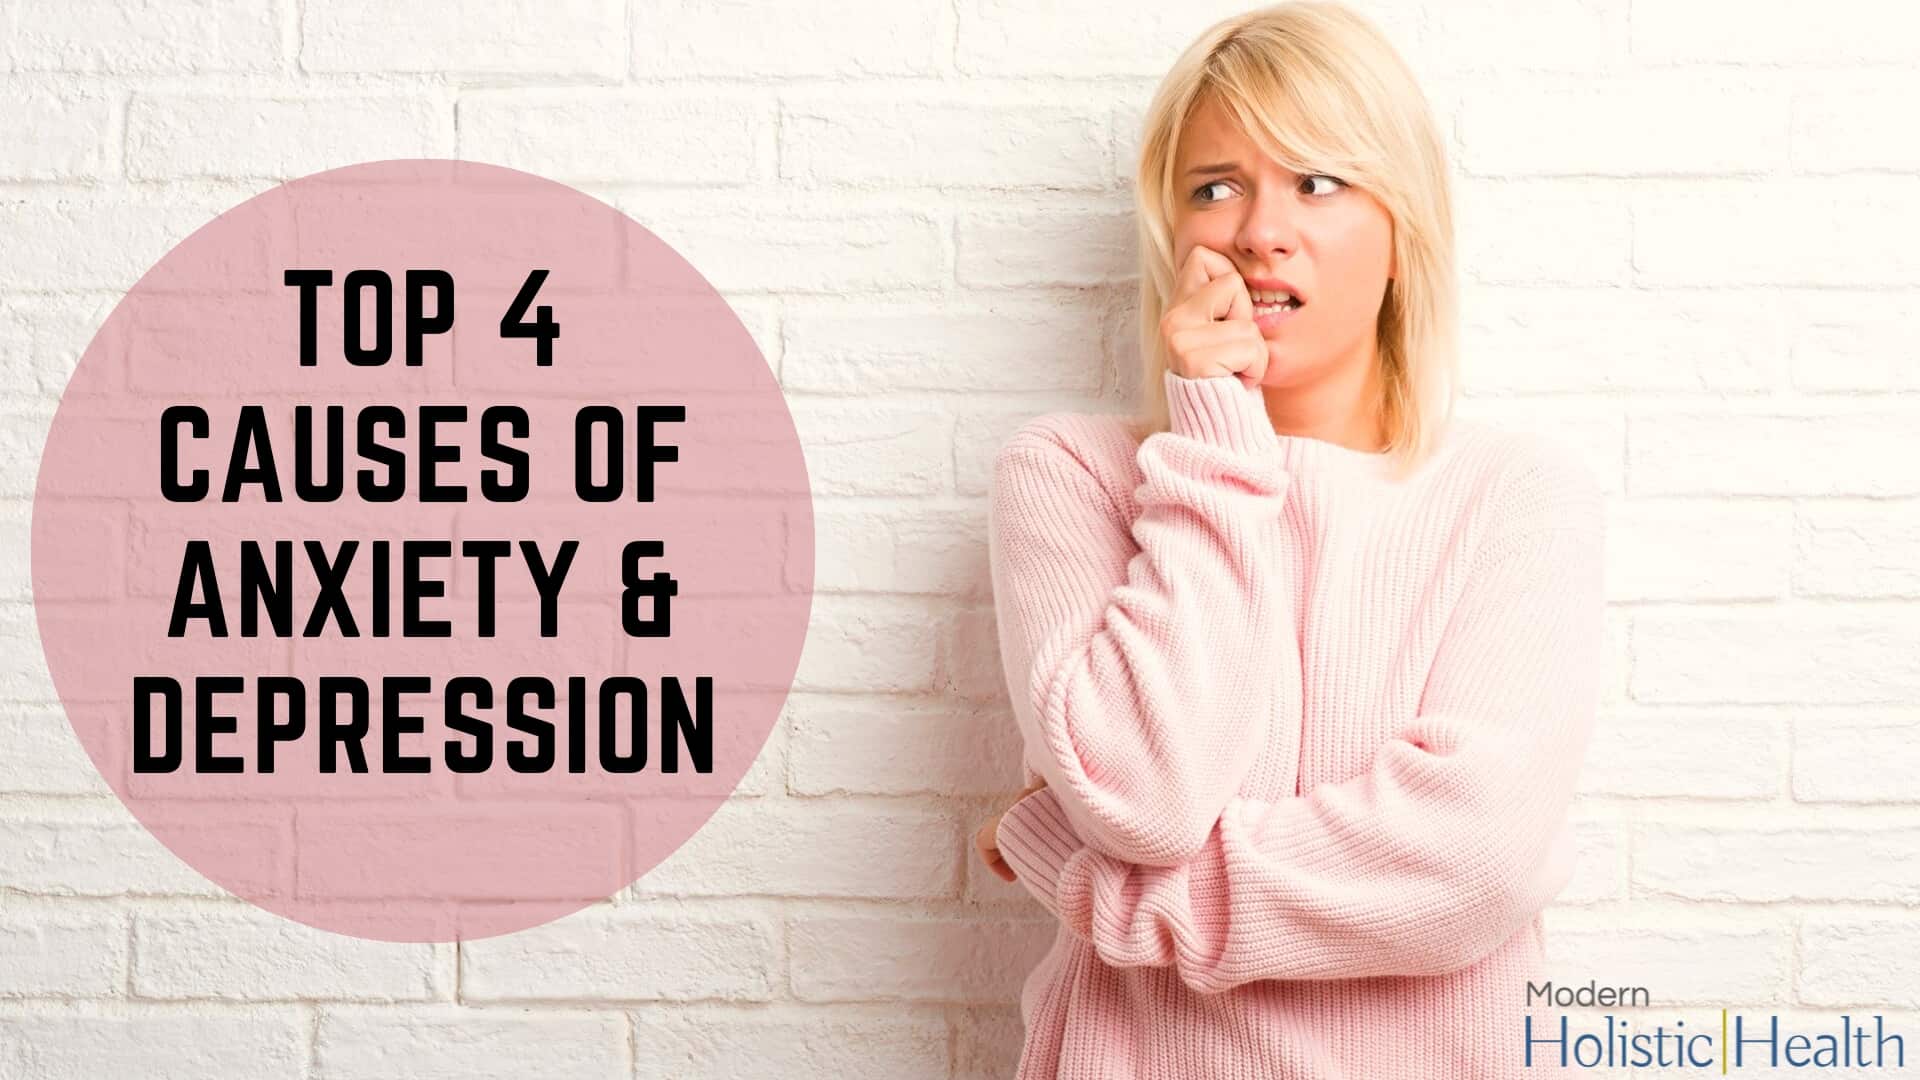 Top 4 Causes of Anxiety & Depression